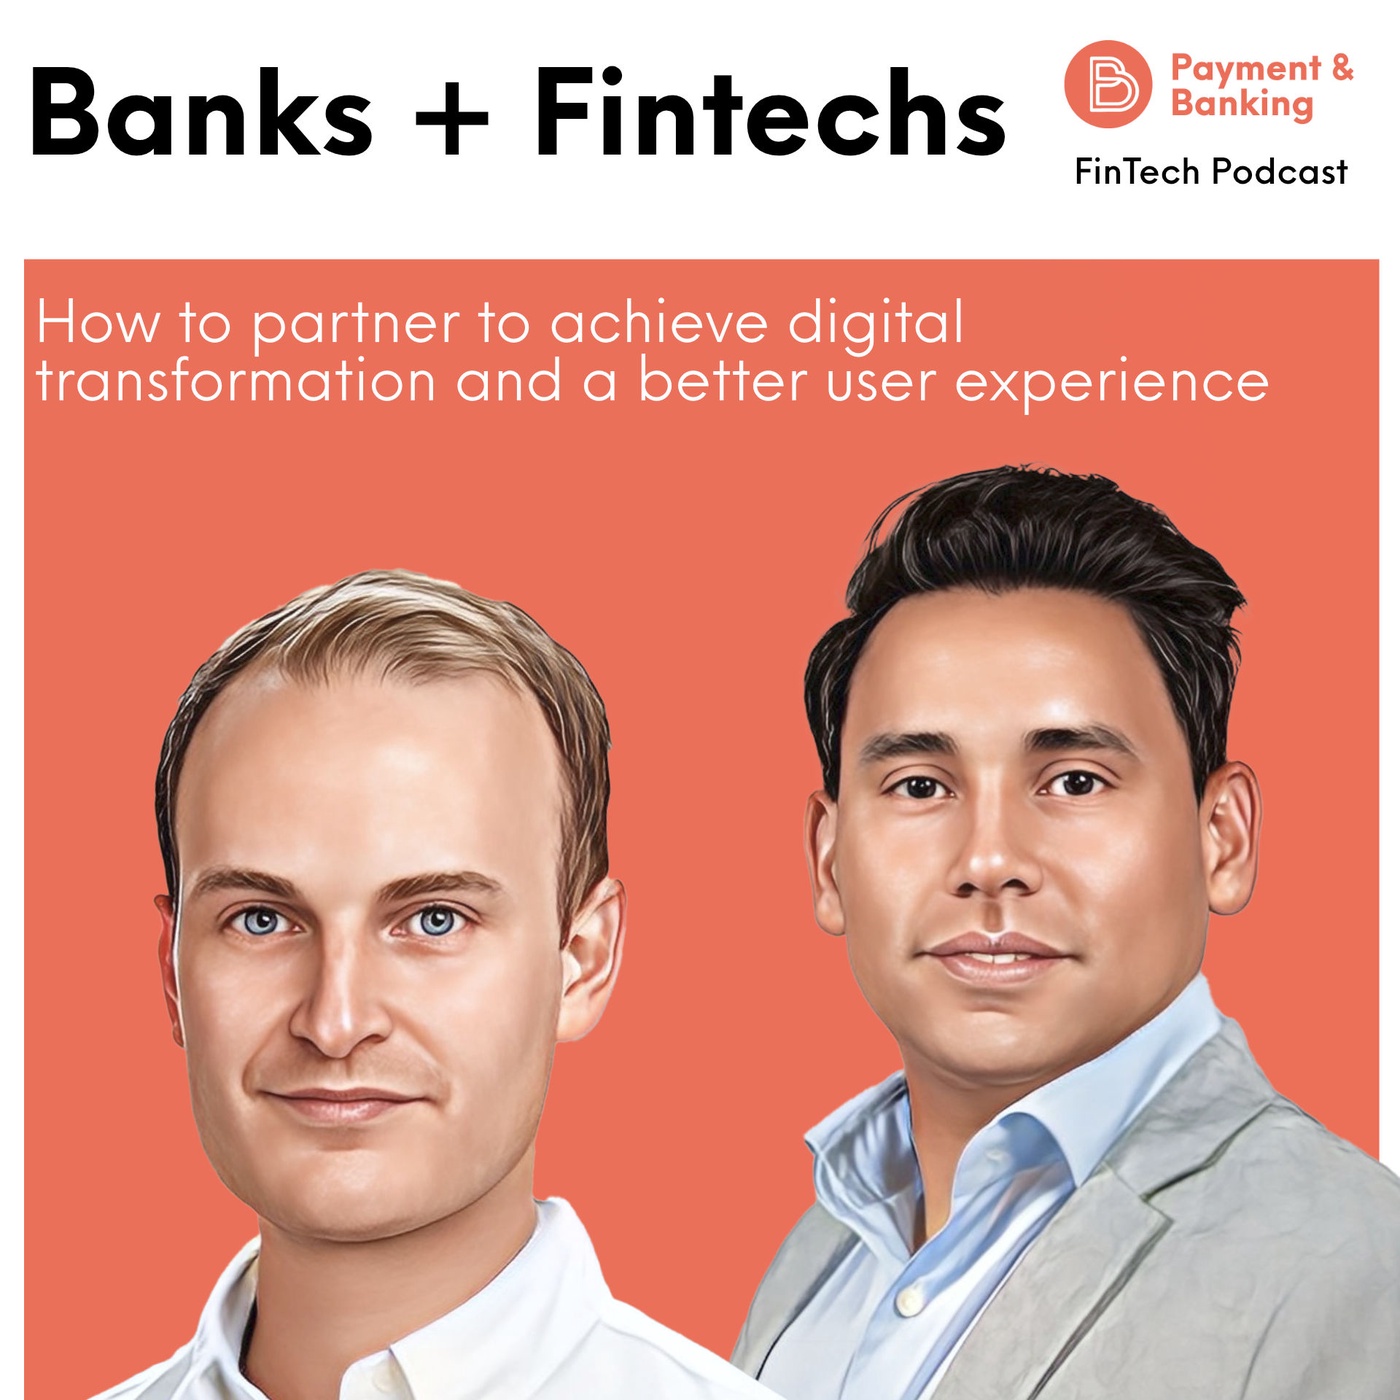 #429 - Banks + Fintechs: How to partner for a better user experience